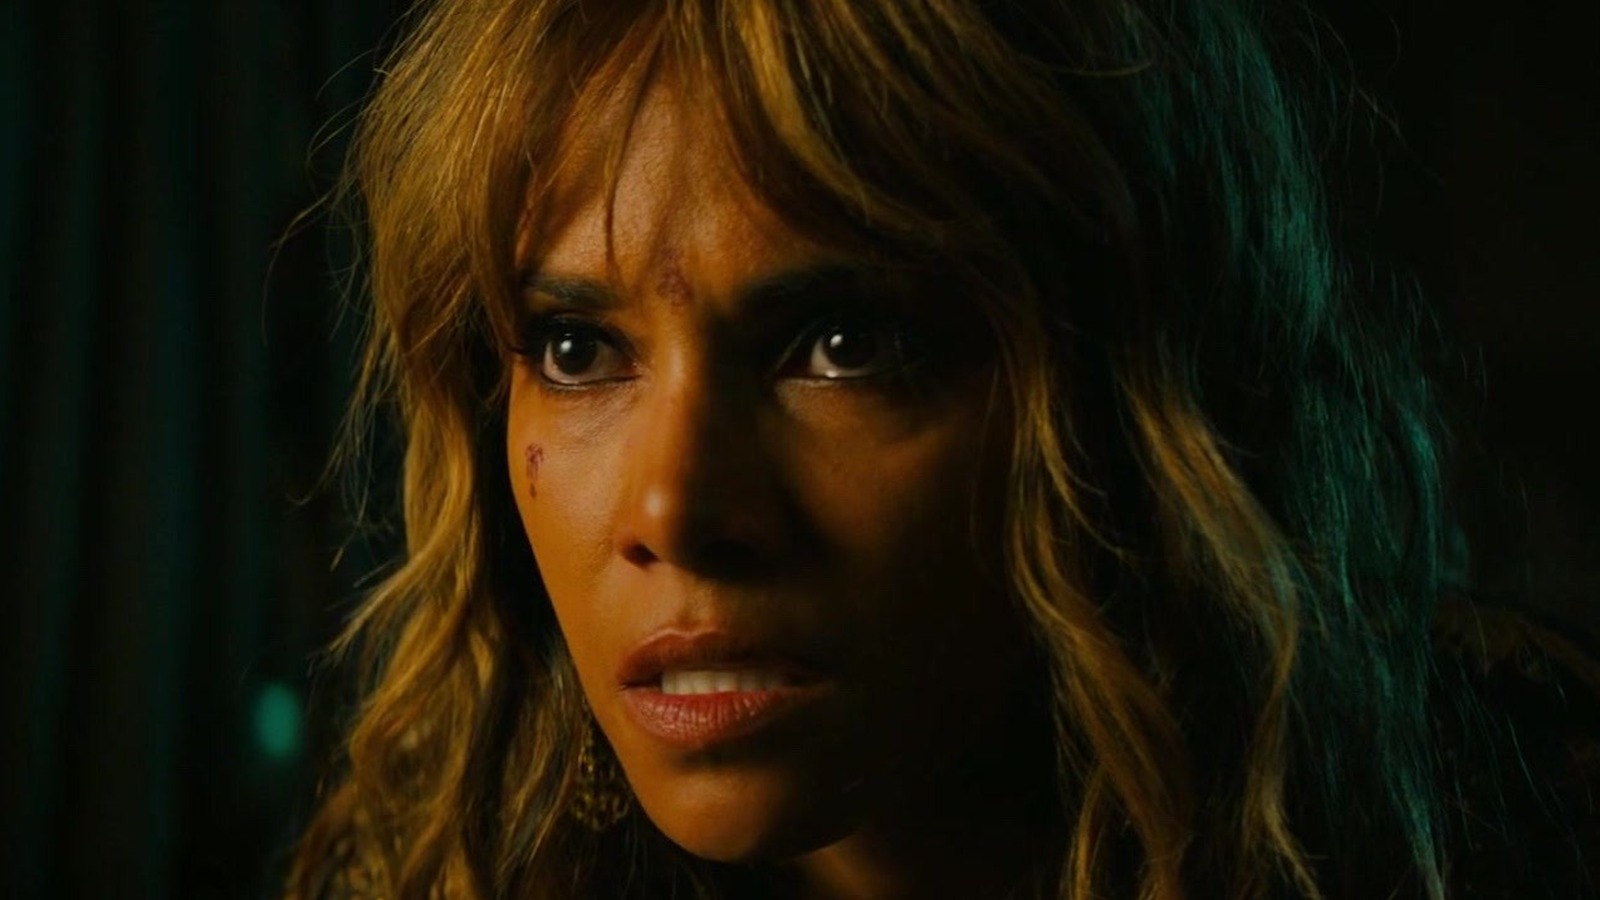 Halle Berry Reacts to Early Career Film Scenes in Viral Video